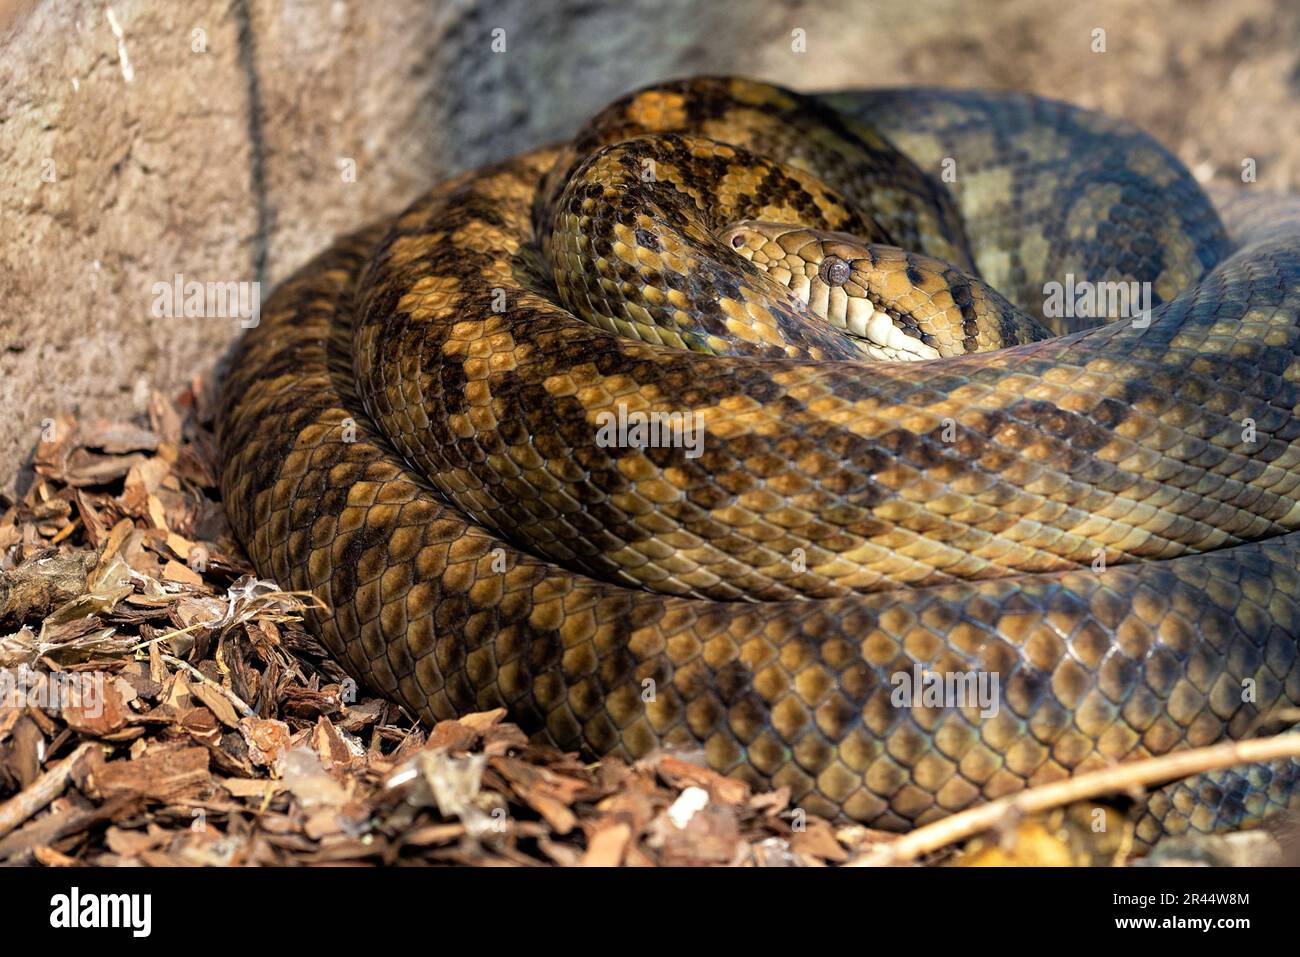 A snake with a pattern of shiny scales lies curled up in the autumn foliage, and listens with its eyes following the environment. Stock Photo